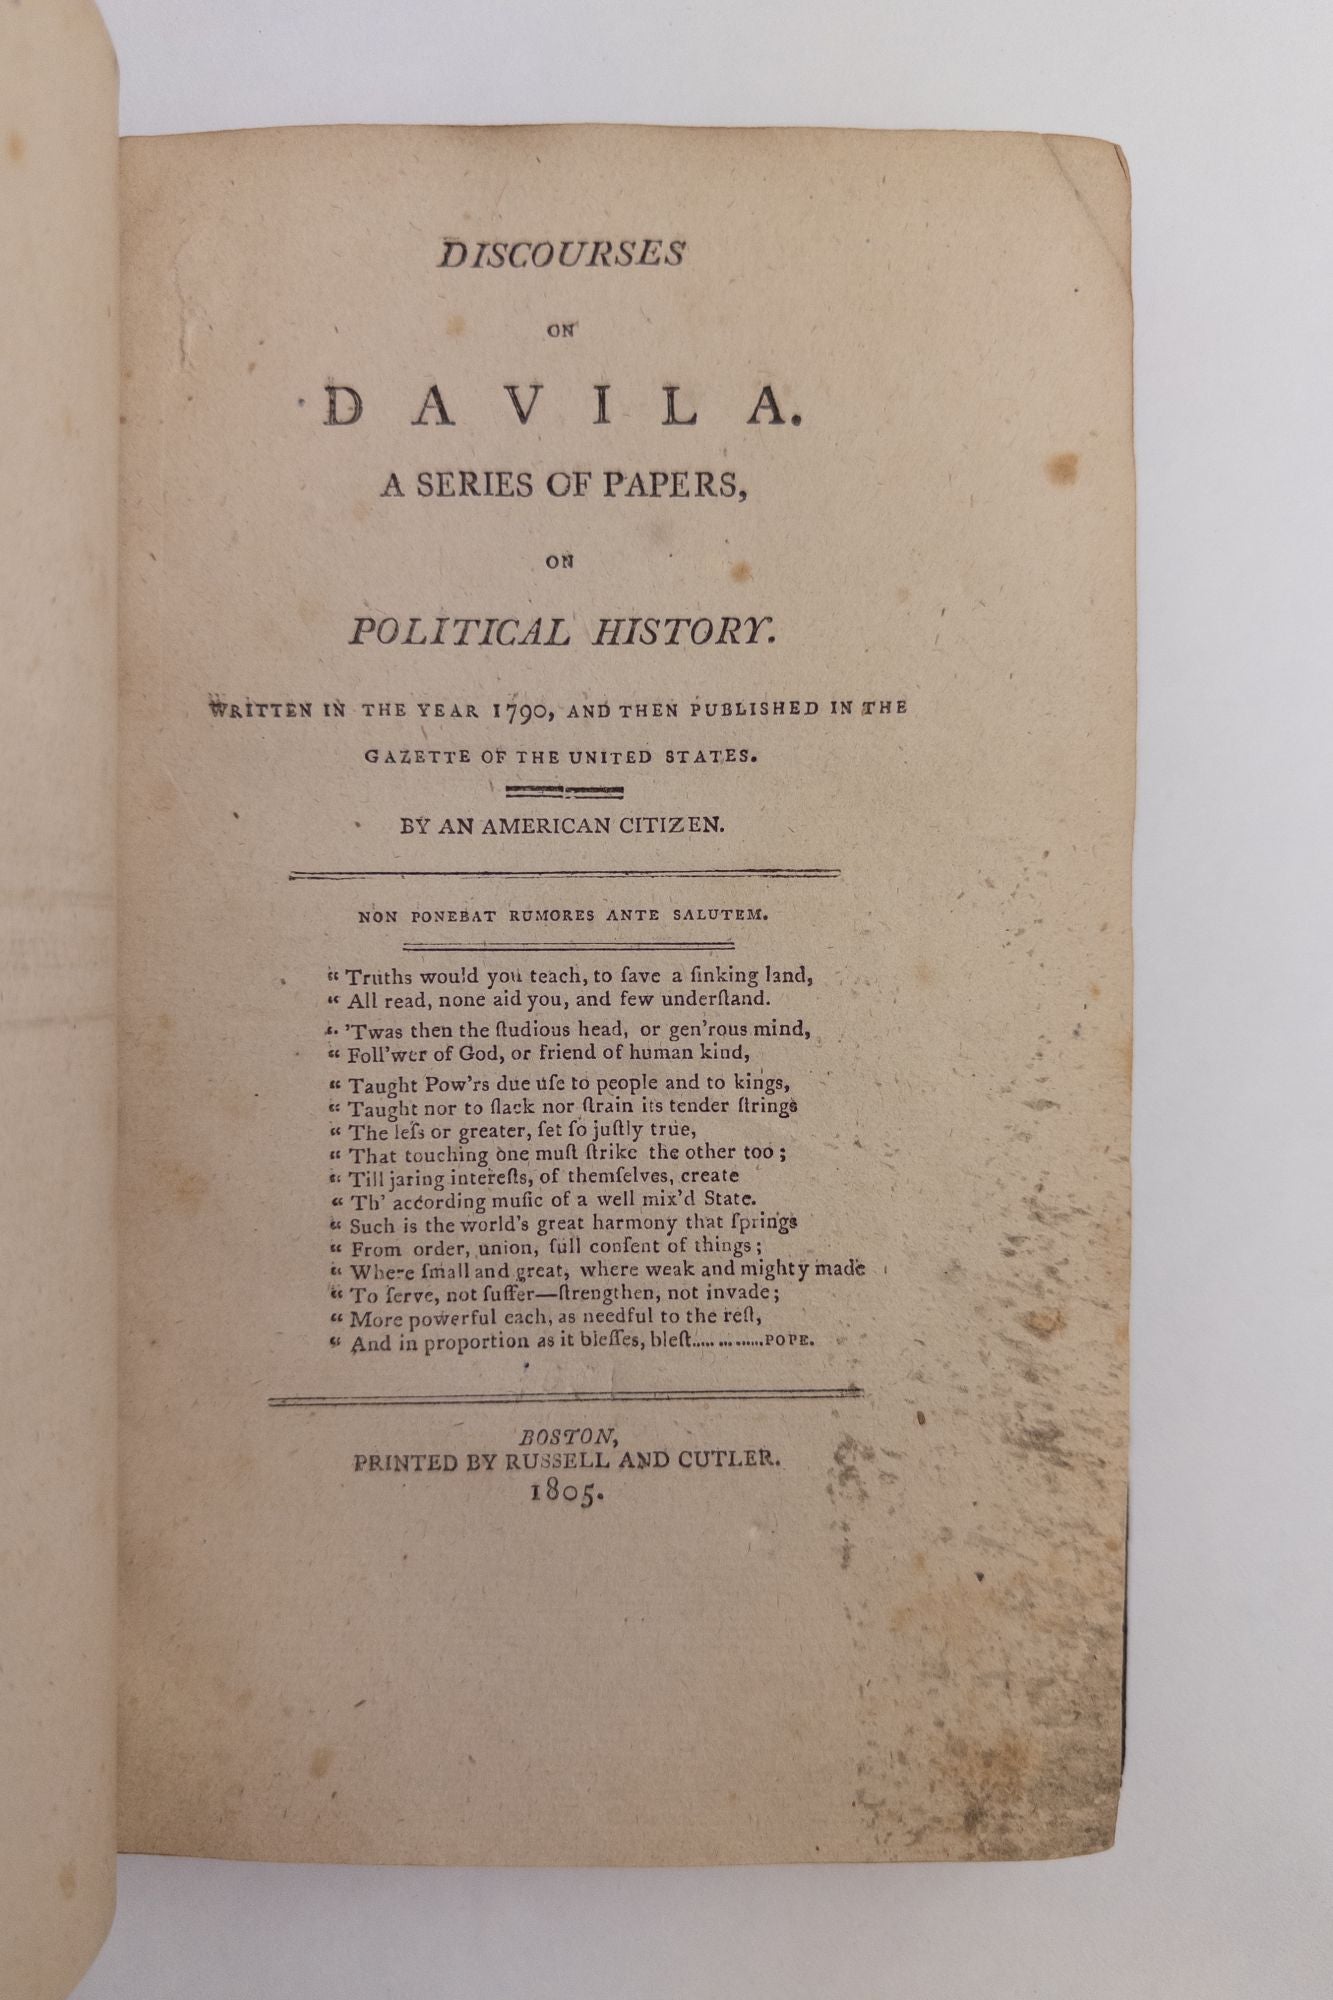 Product Image for DISCOURSES ON DAVILA: A SERIES OF PAPERS ON POLITICAL HISTORY